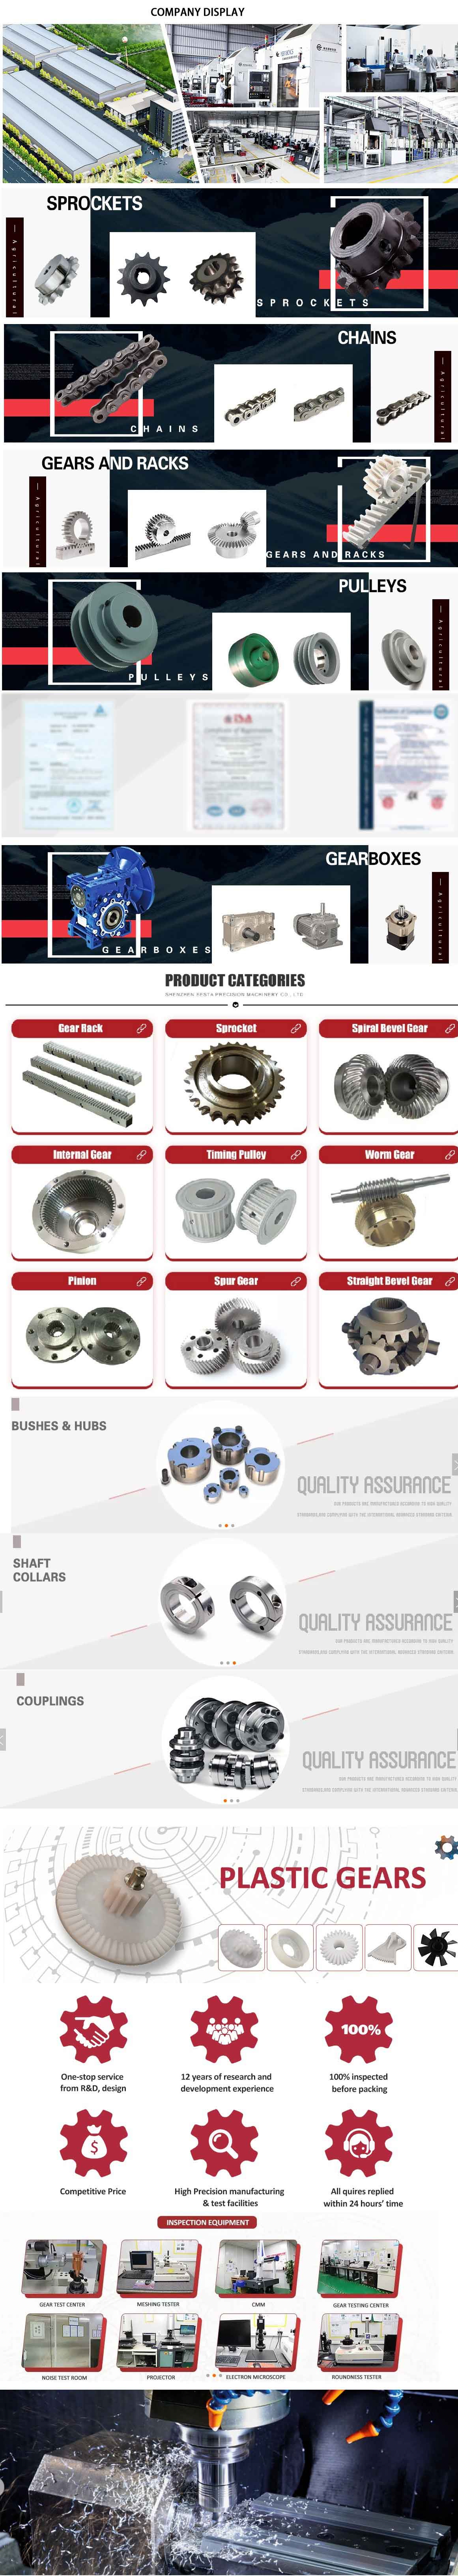 Best  made in China - replacement parts - agricultural gearbox manufacturer in China Australia   john deere corn head gearbox   Nakhon Ratchasima Thailand   Popular 130HP Farm Tractor with Front Loader  with ce certificate top quality low price suitable for Tractor, Agricultural machines, right angle pto shaft drive 